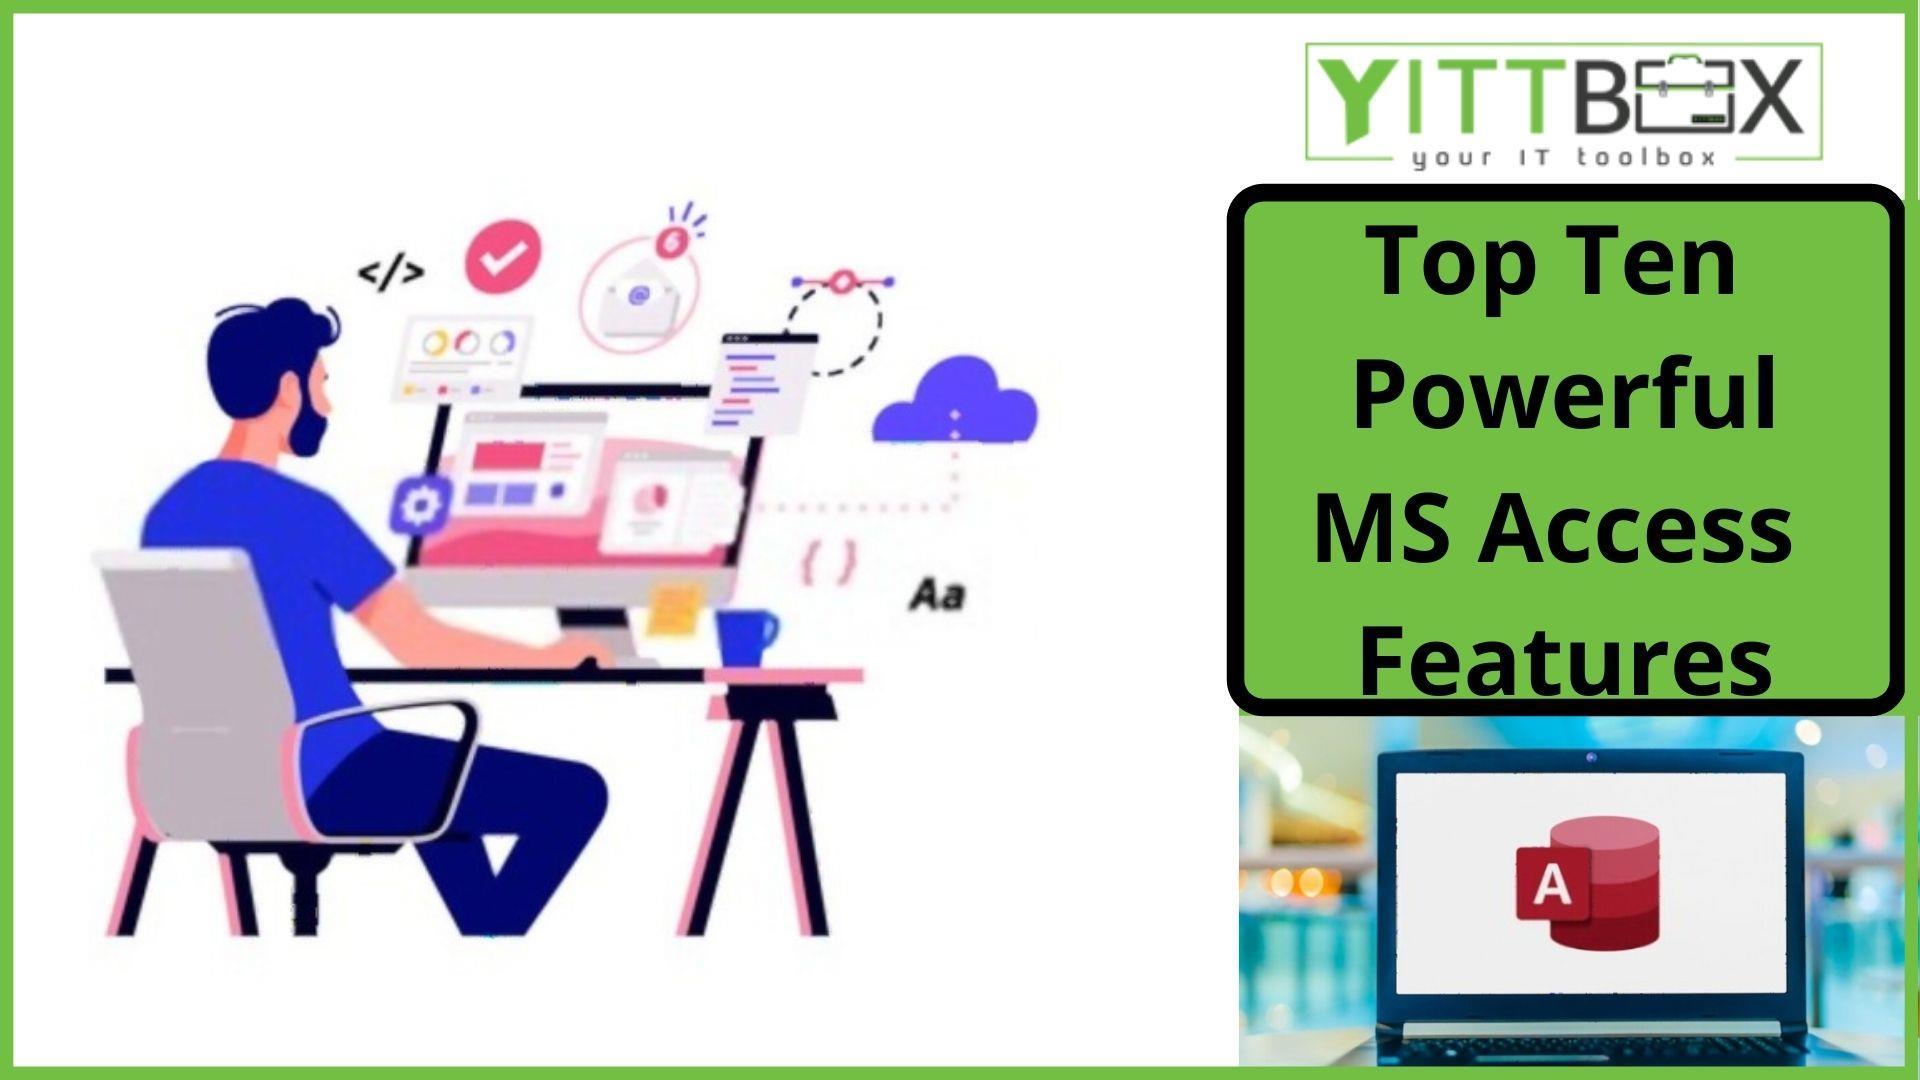 Top Ten Powerful MS Access Features